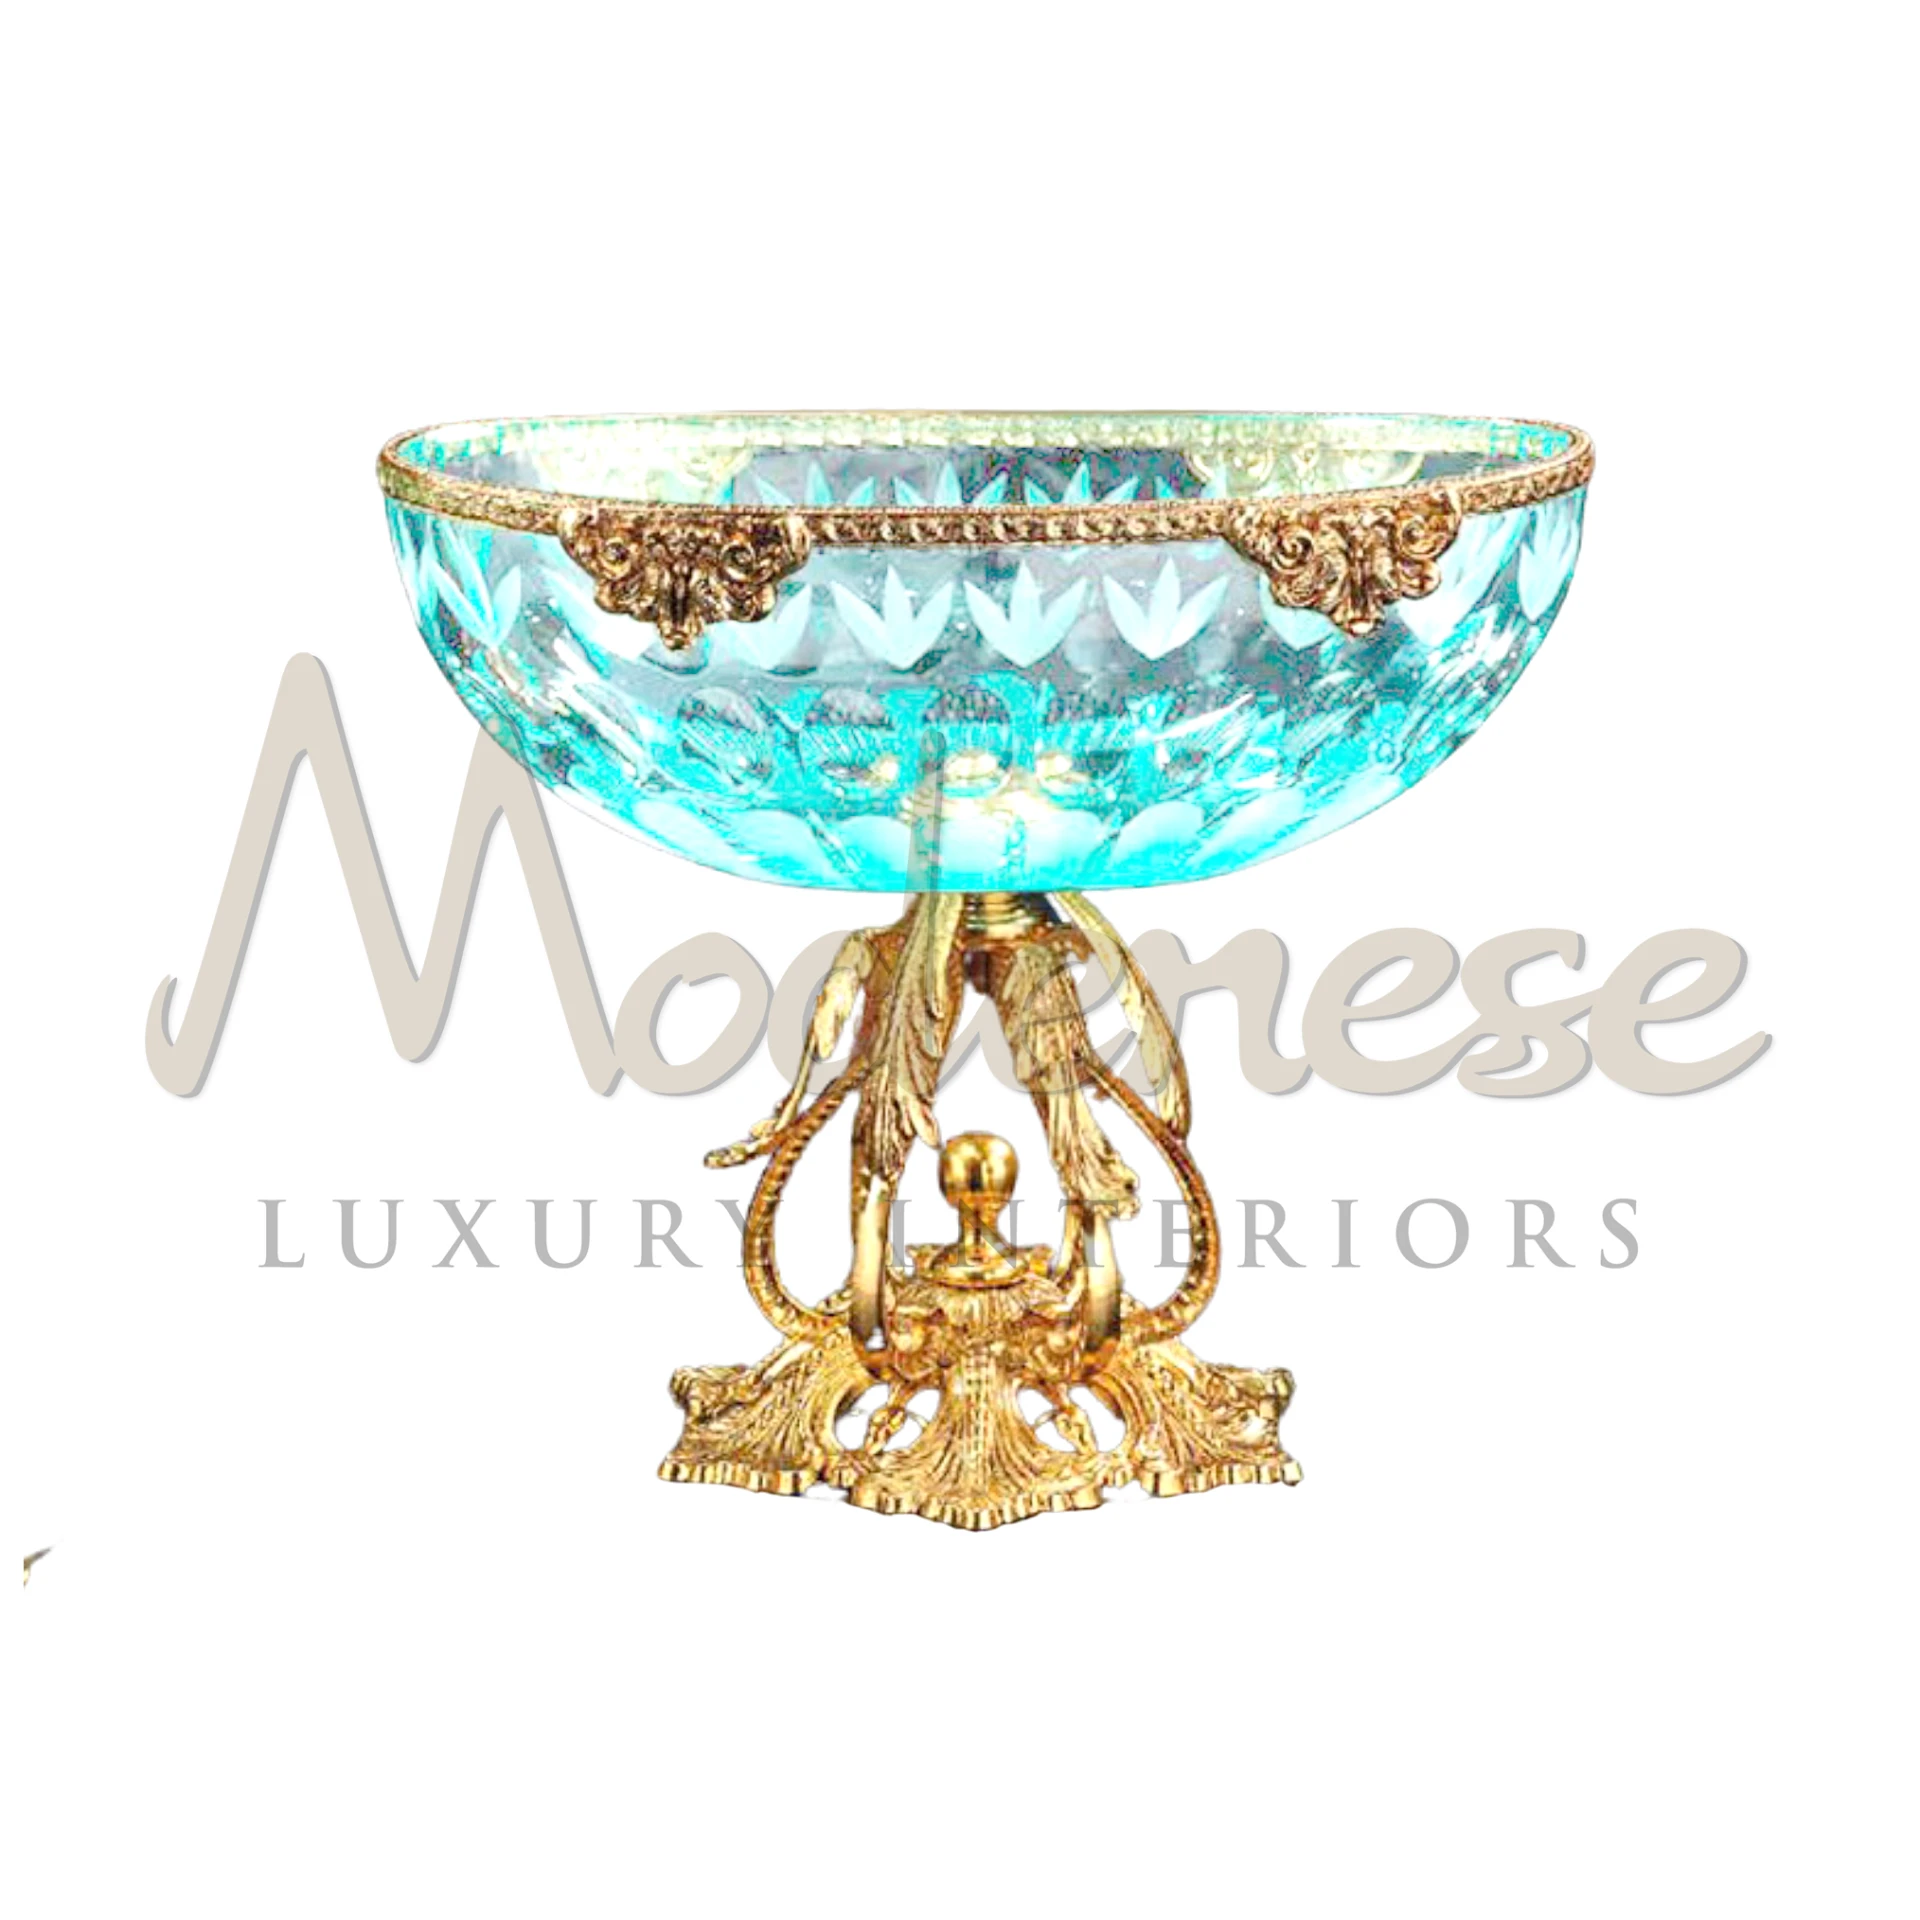 Elegant Rococo Turquoise Bowl, perfect for luxury interiors, combining baroque and classic styles, ideal as a vase or centerpiece in lavish spaces.






